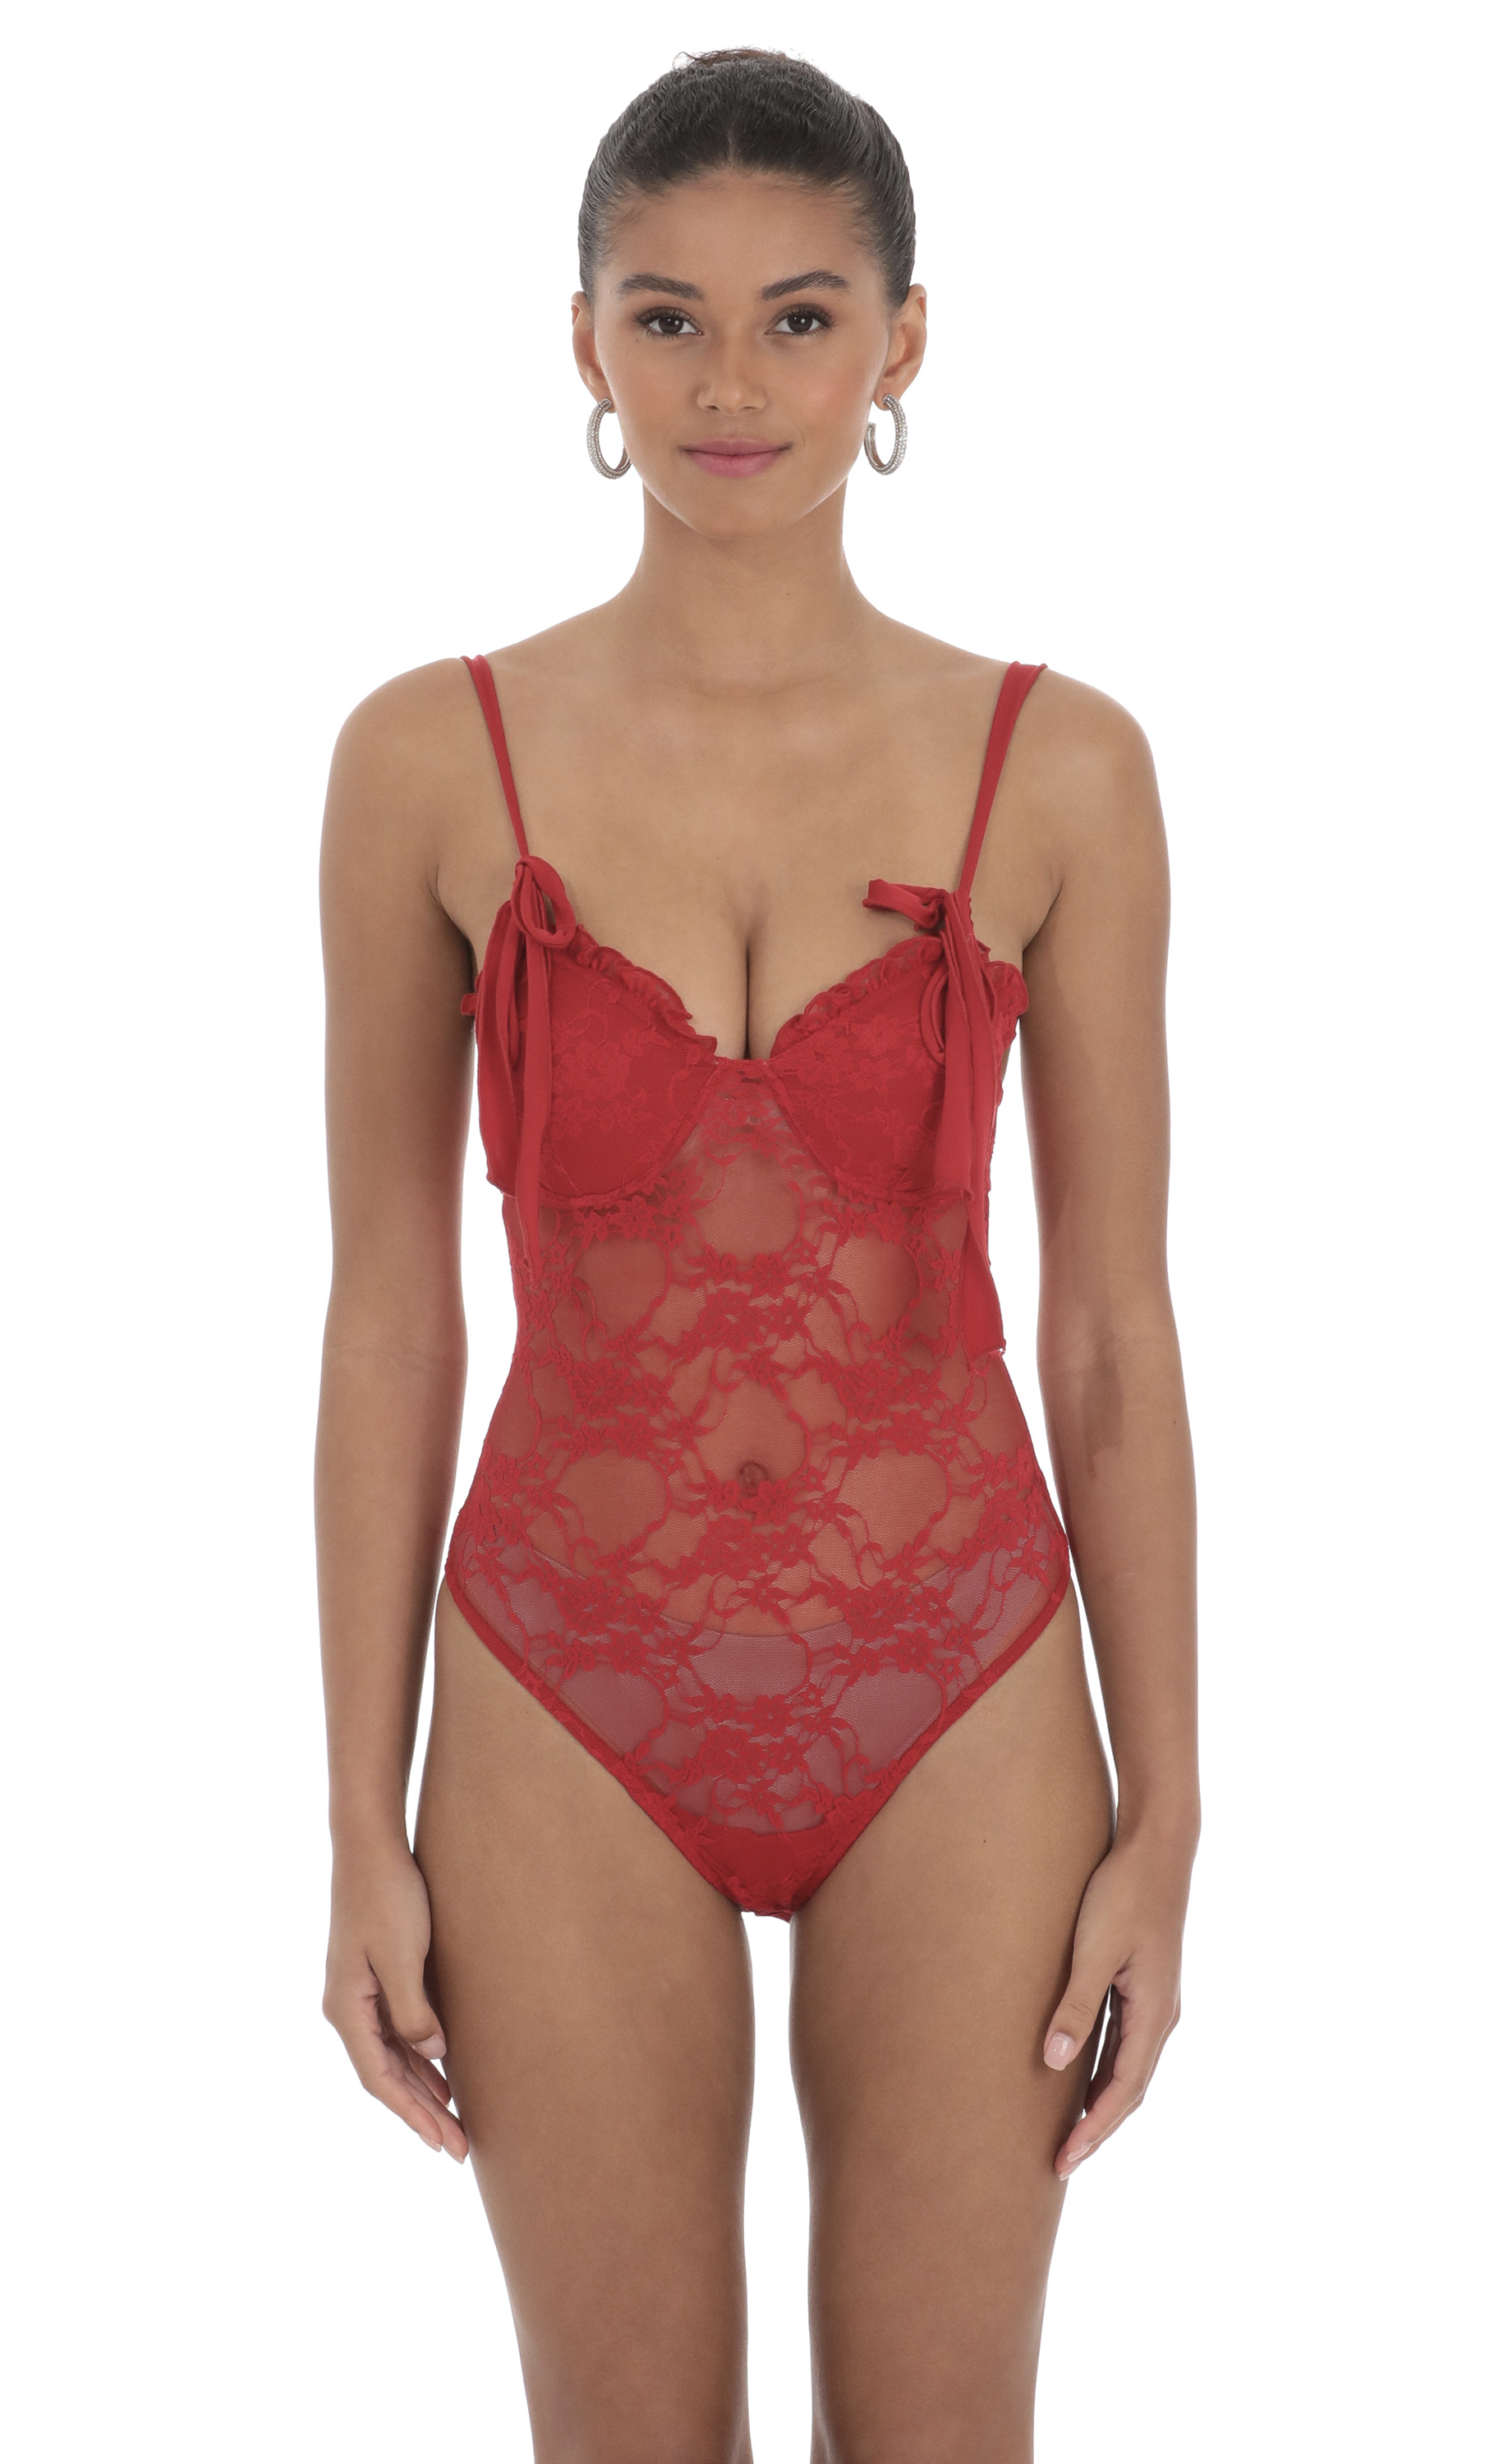 Lace Bodysuit in Red